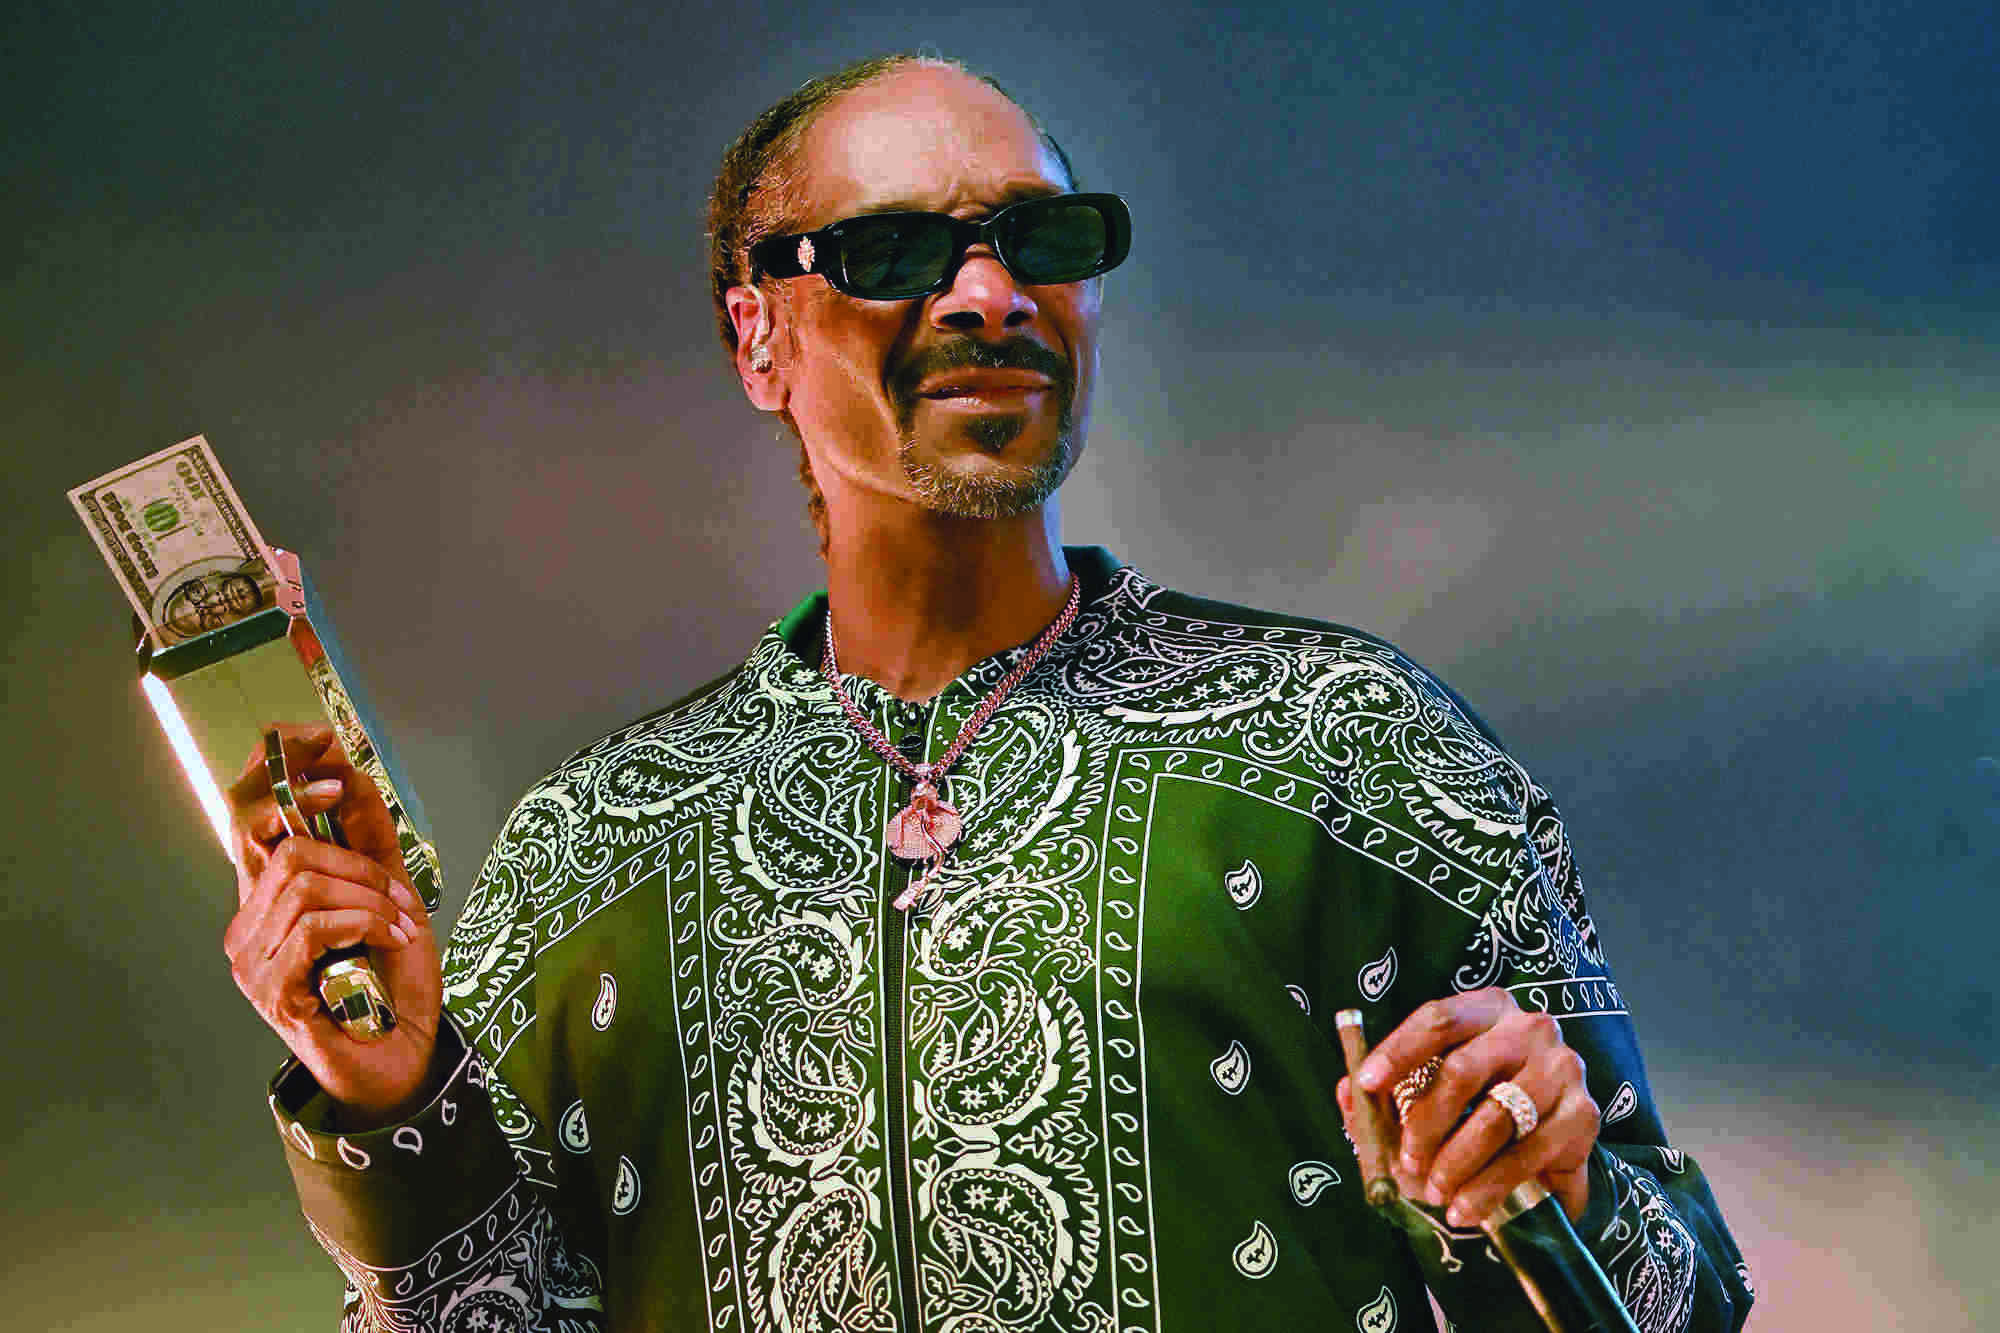 Snoop Dogg accused of sexual assault and battery